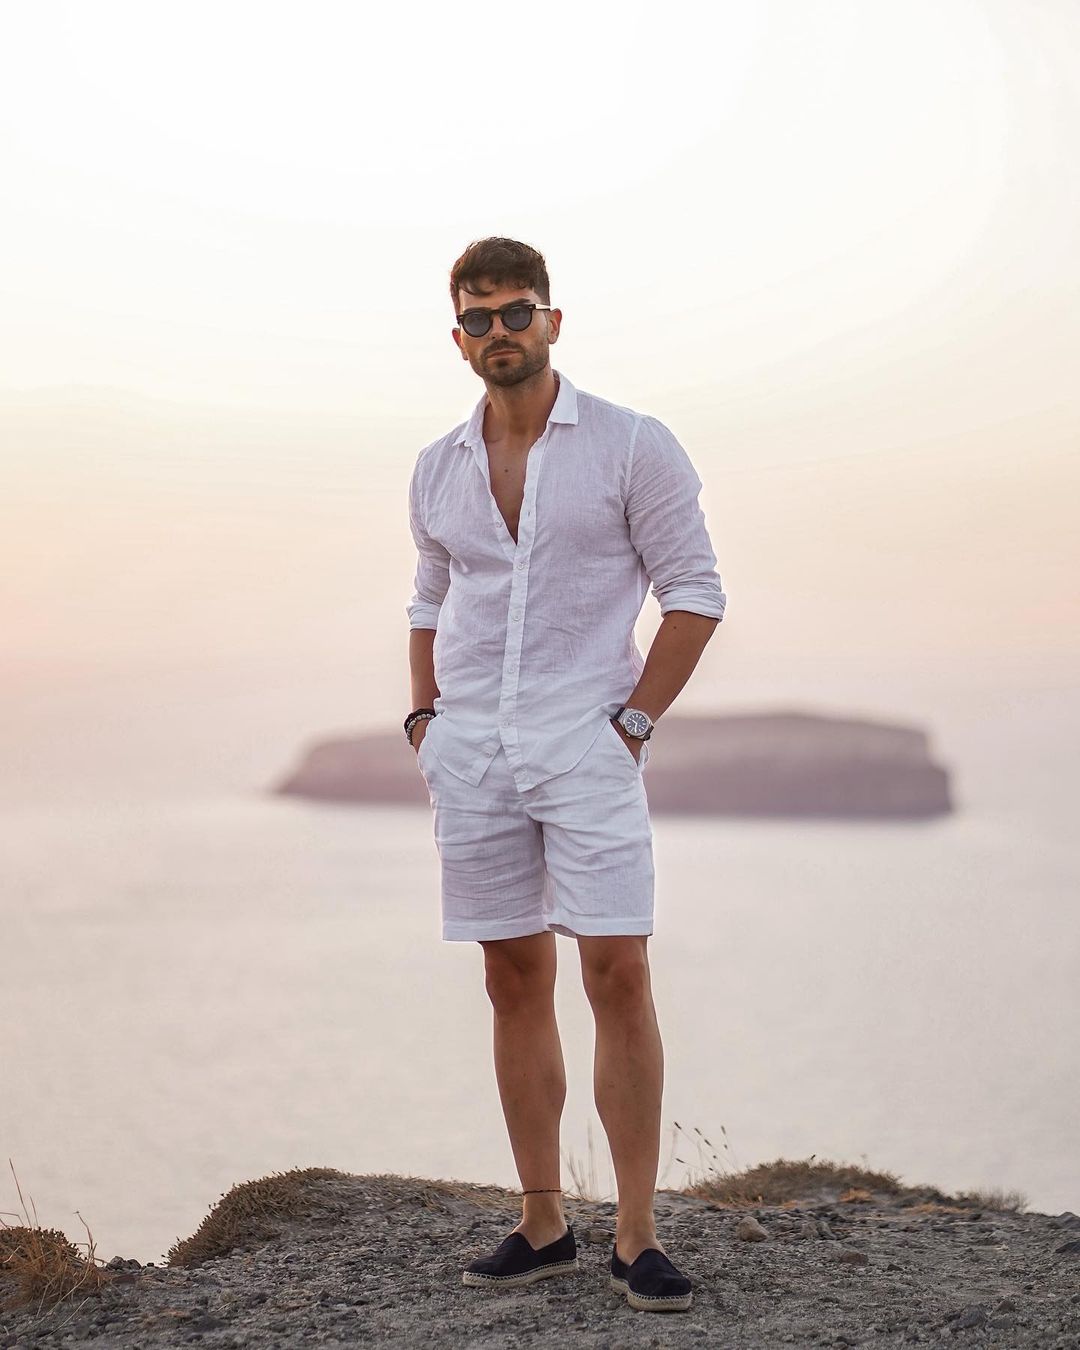 55 fresh and cool white shorts outfits for men. - vogueymen.com